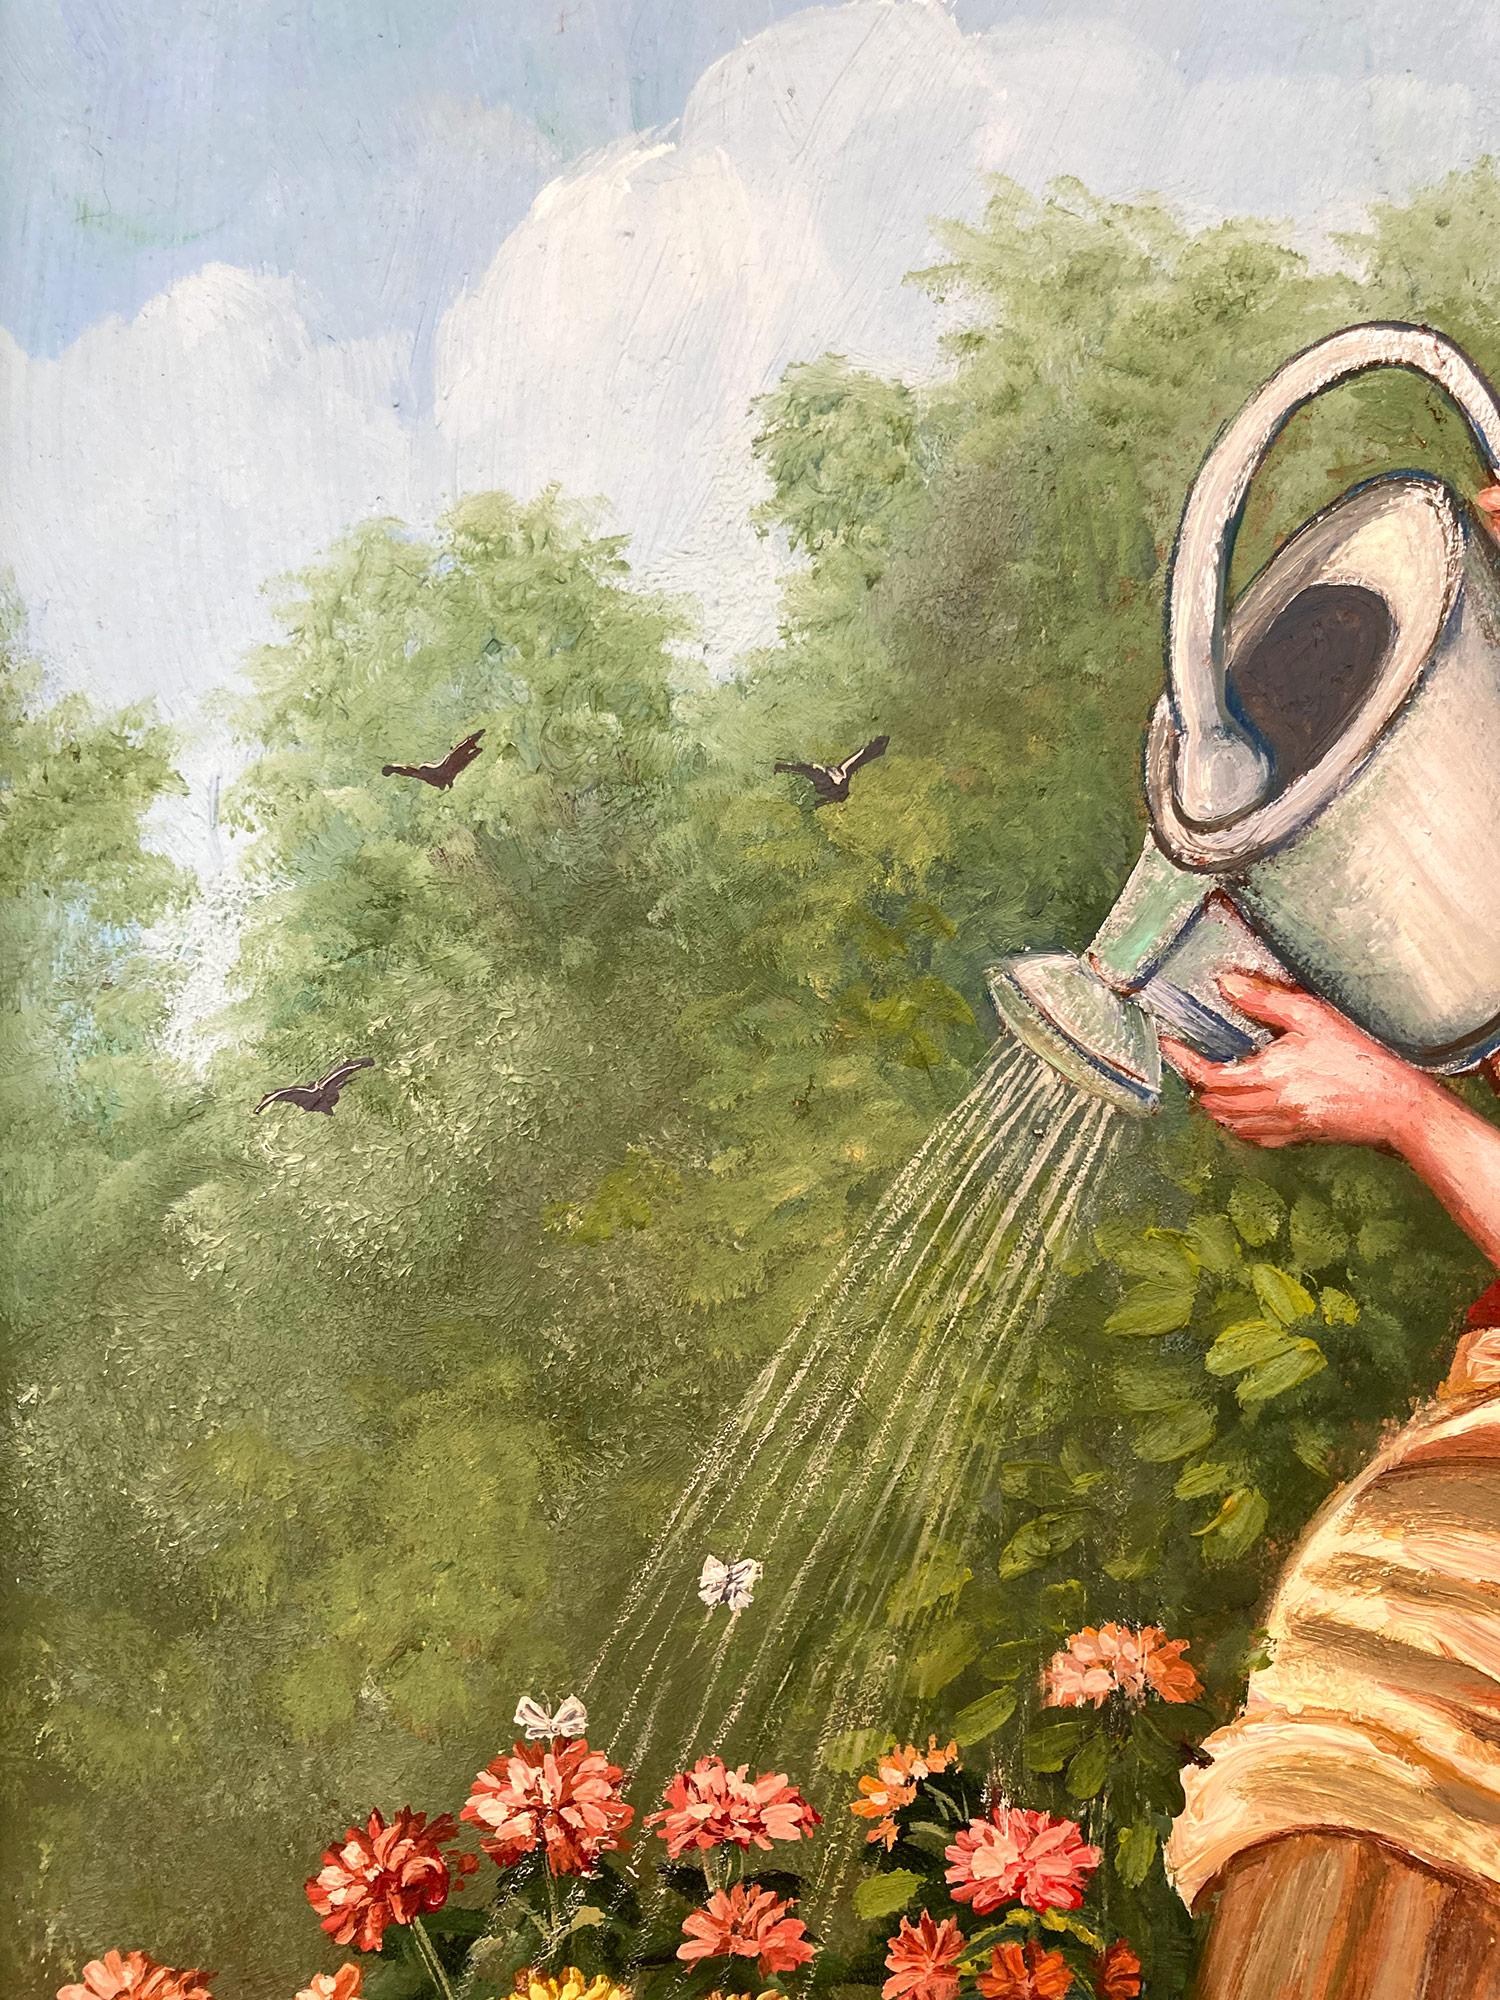 A stunning depiction of a classical woman watering flower in the garden. Nemethy uses a bold impressionistic technique with thick use of paint and wonderful impressions. With unique colors from the North East, we can feel the atmosphere